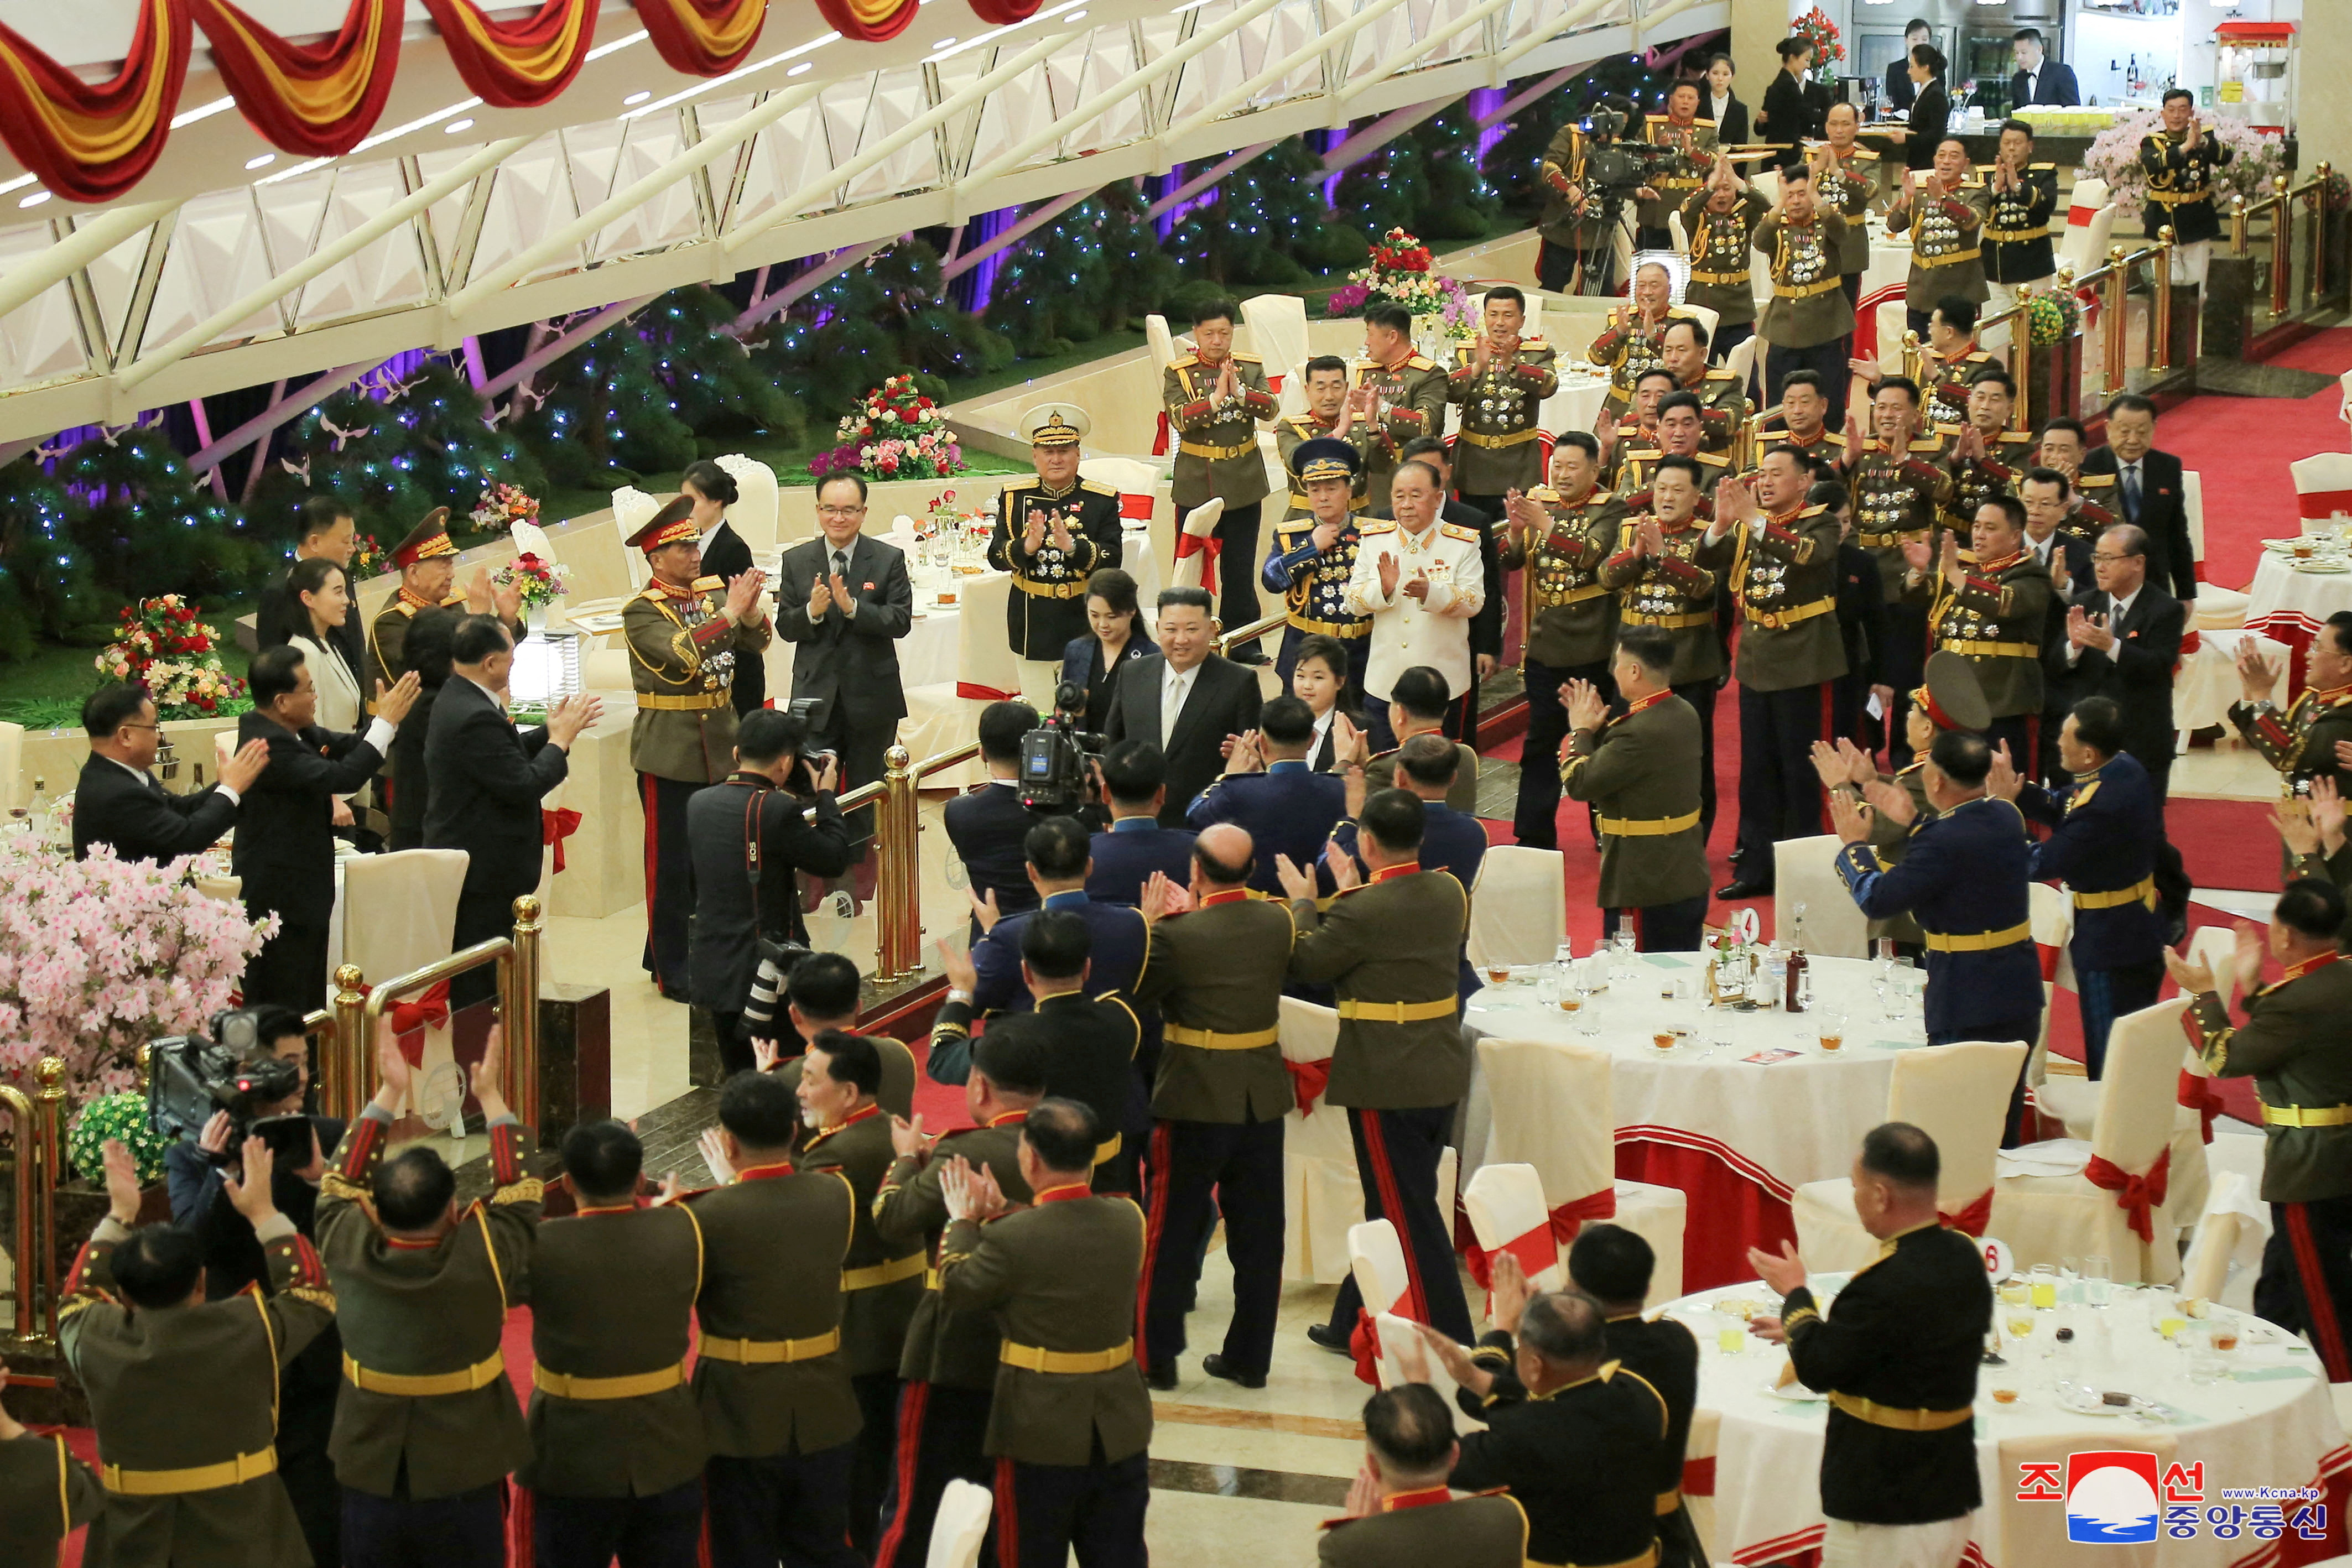 Banquet to celebrate the 75th anniversary of the Korean People's Army, in Pyongyang